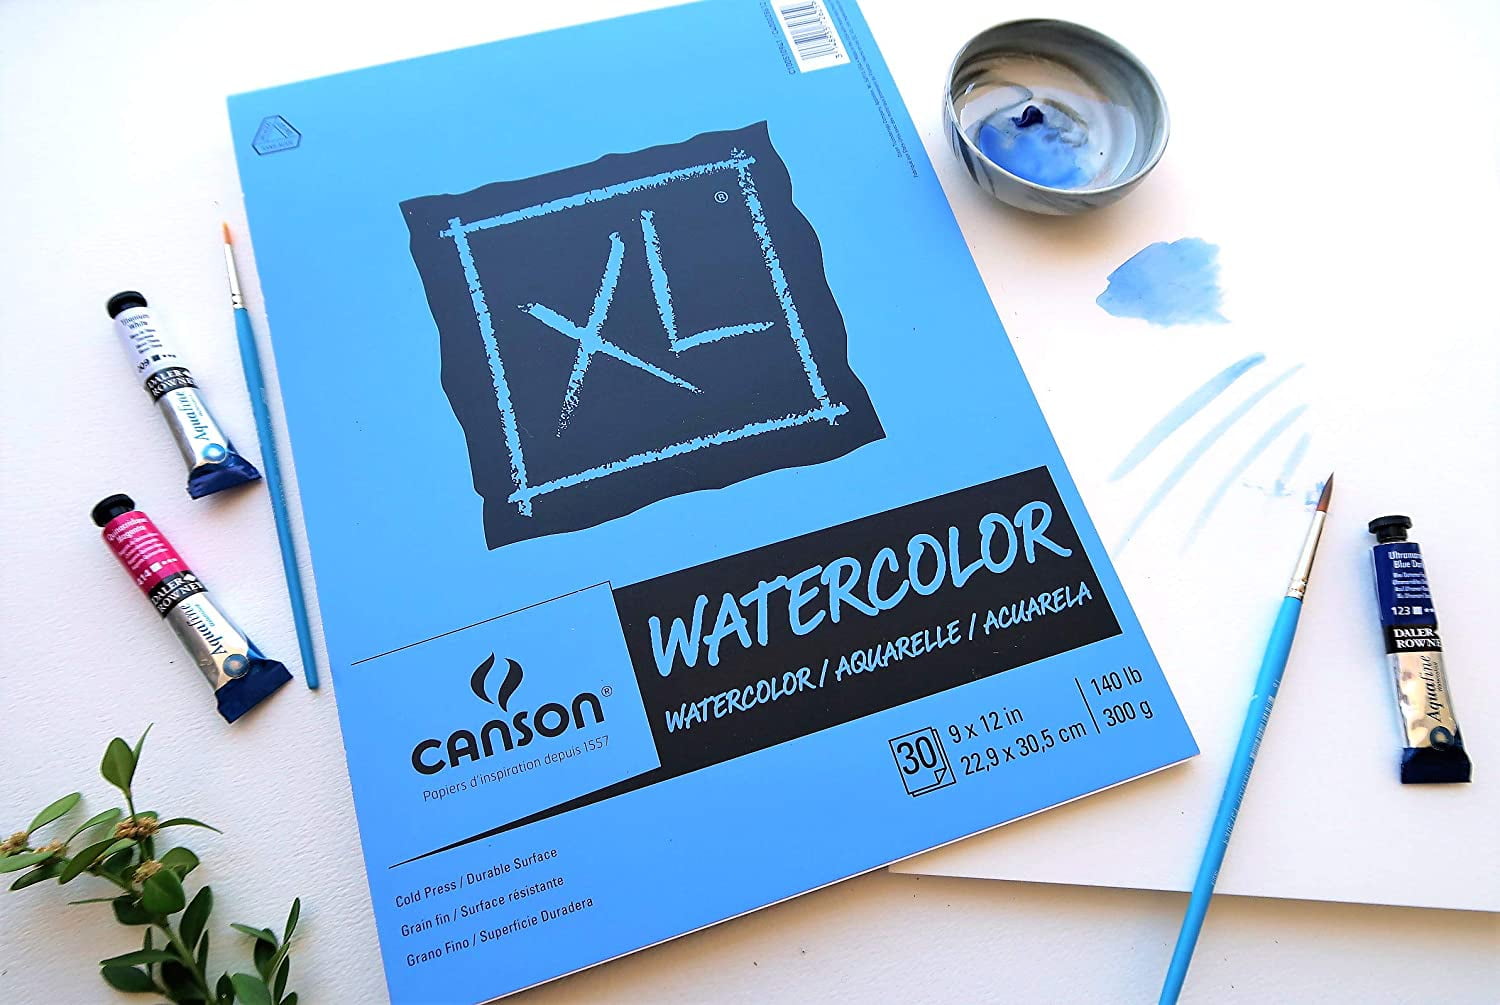 Canson XL Series Watercolor Paper, Bulk Pack, 9x12 inches, 100 Sheets  (90lb/185g) - Artist Paper for Adults and Students - Watercolors, Mixed  Media